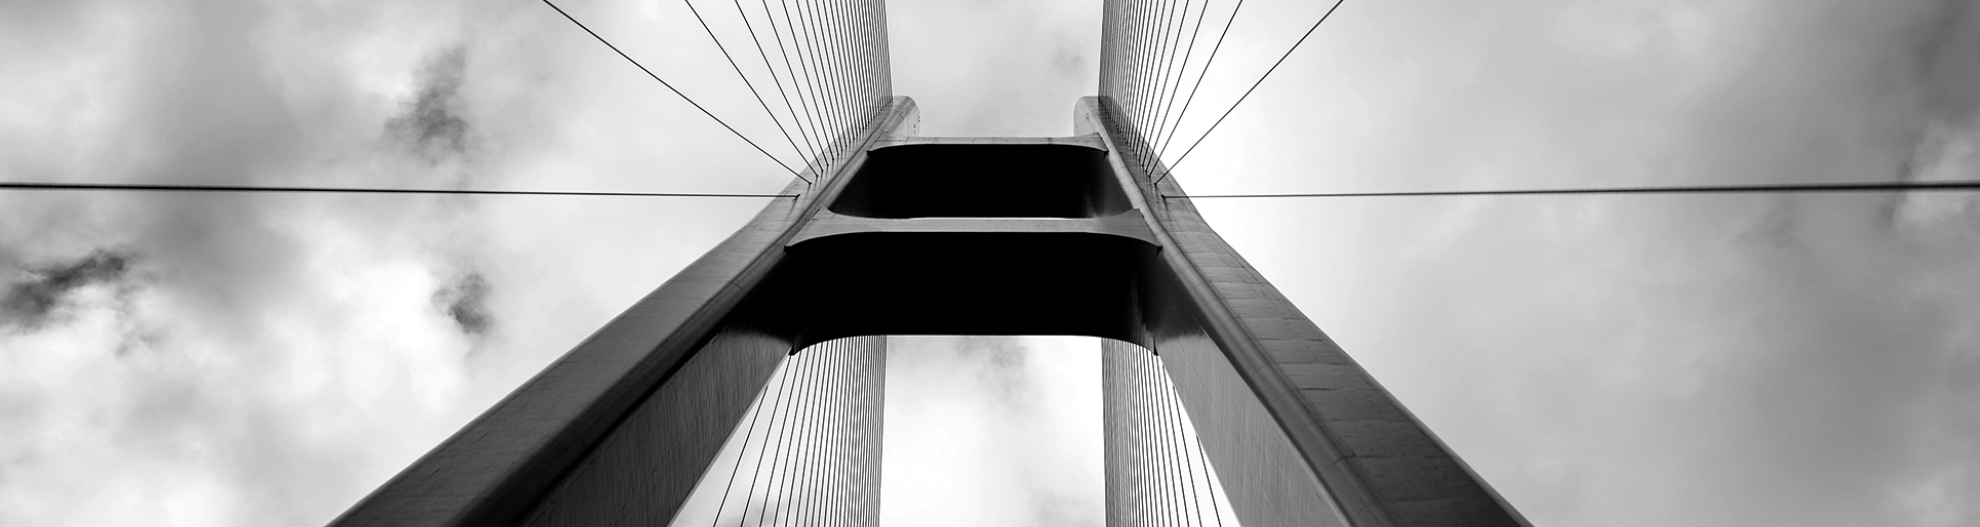 upward view of a bridge with cables